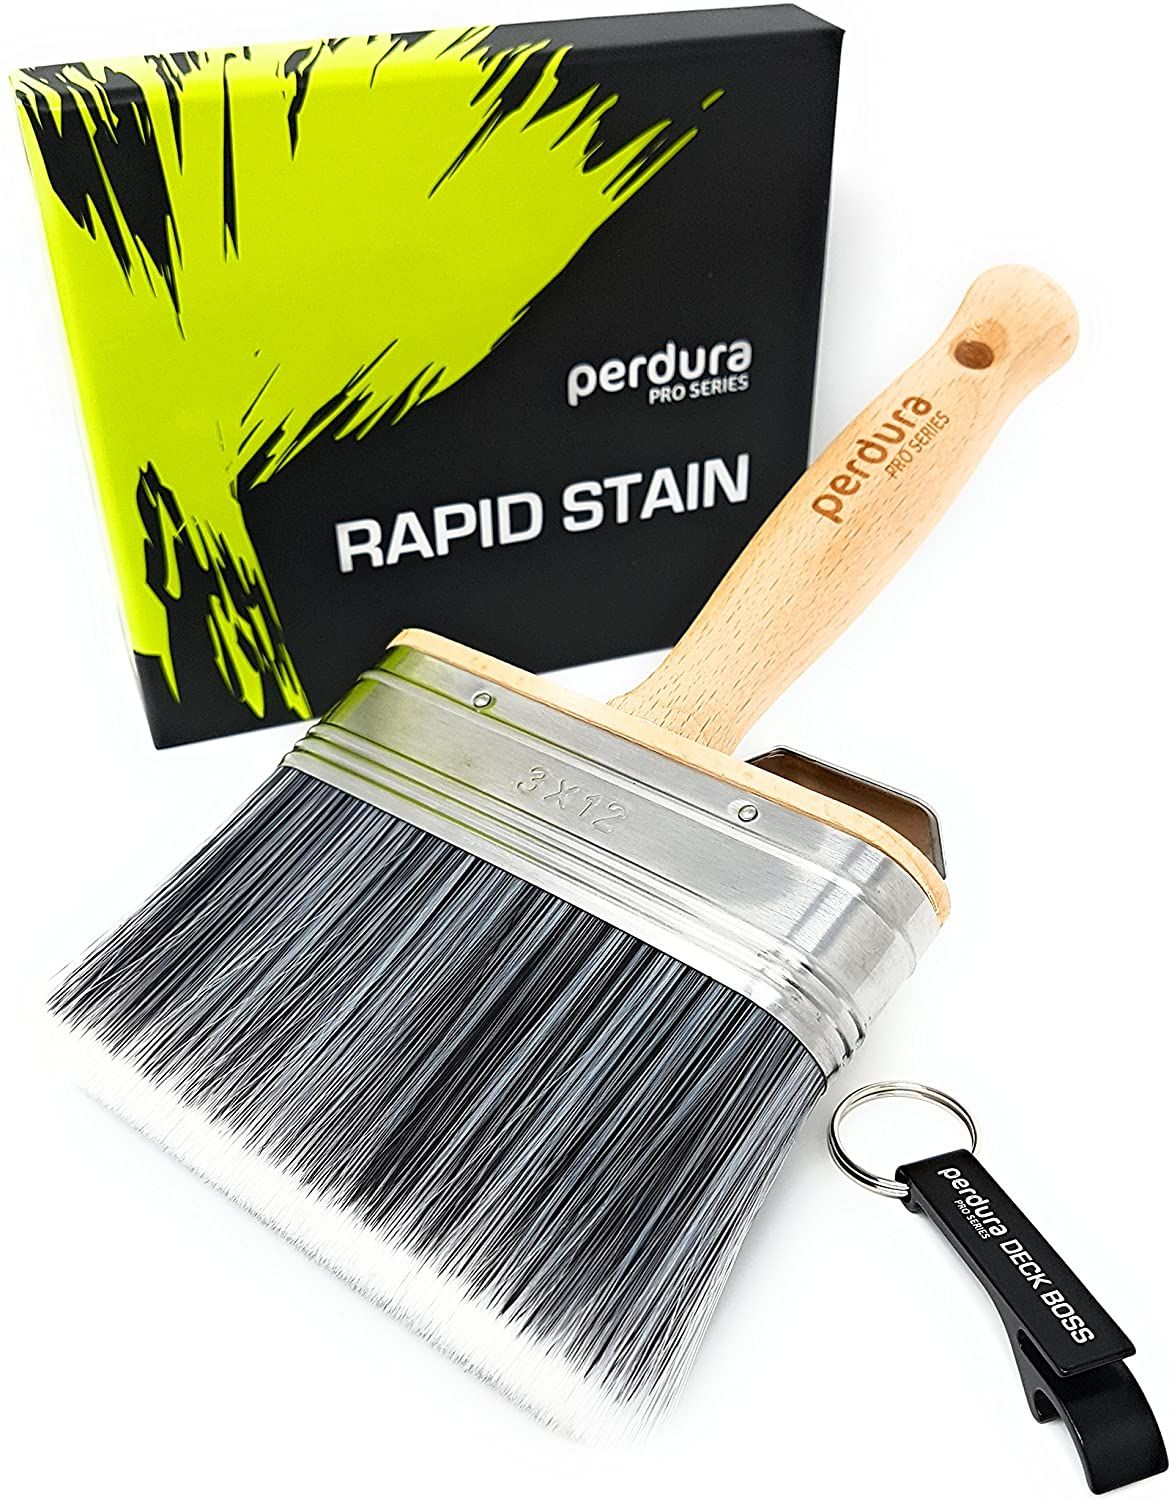 18 Professional Deck Stain Brush